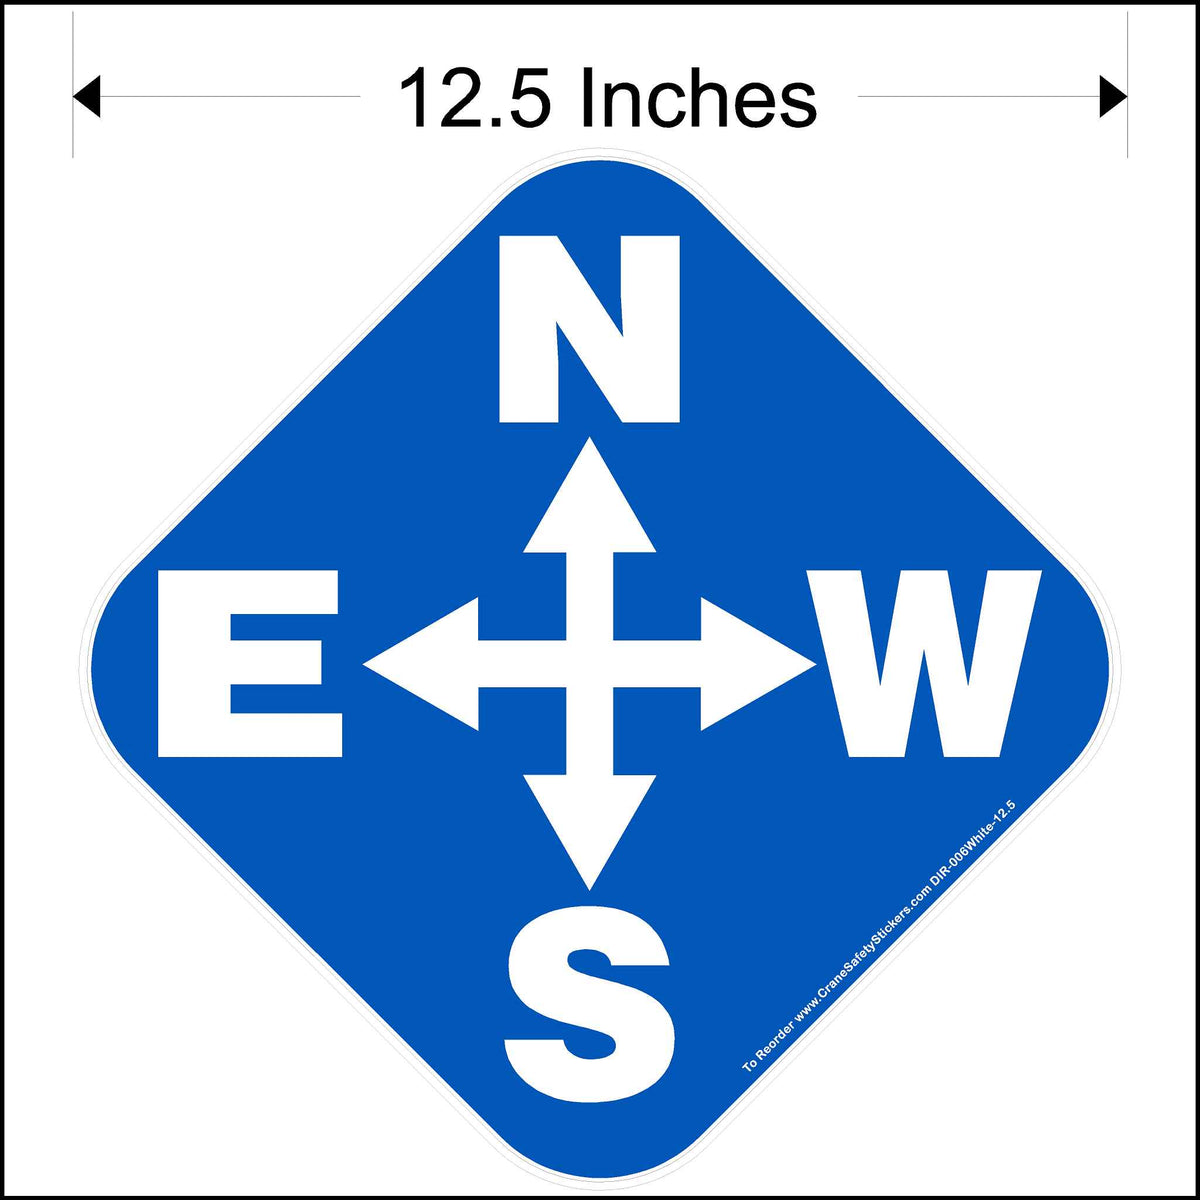 Overhead directional crane decal with white lettering and blue background. Decal size is 12.5 inches square.